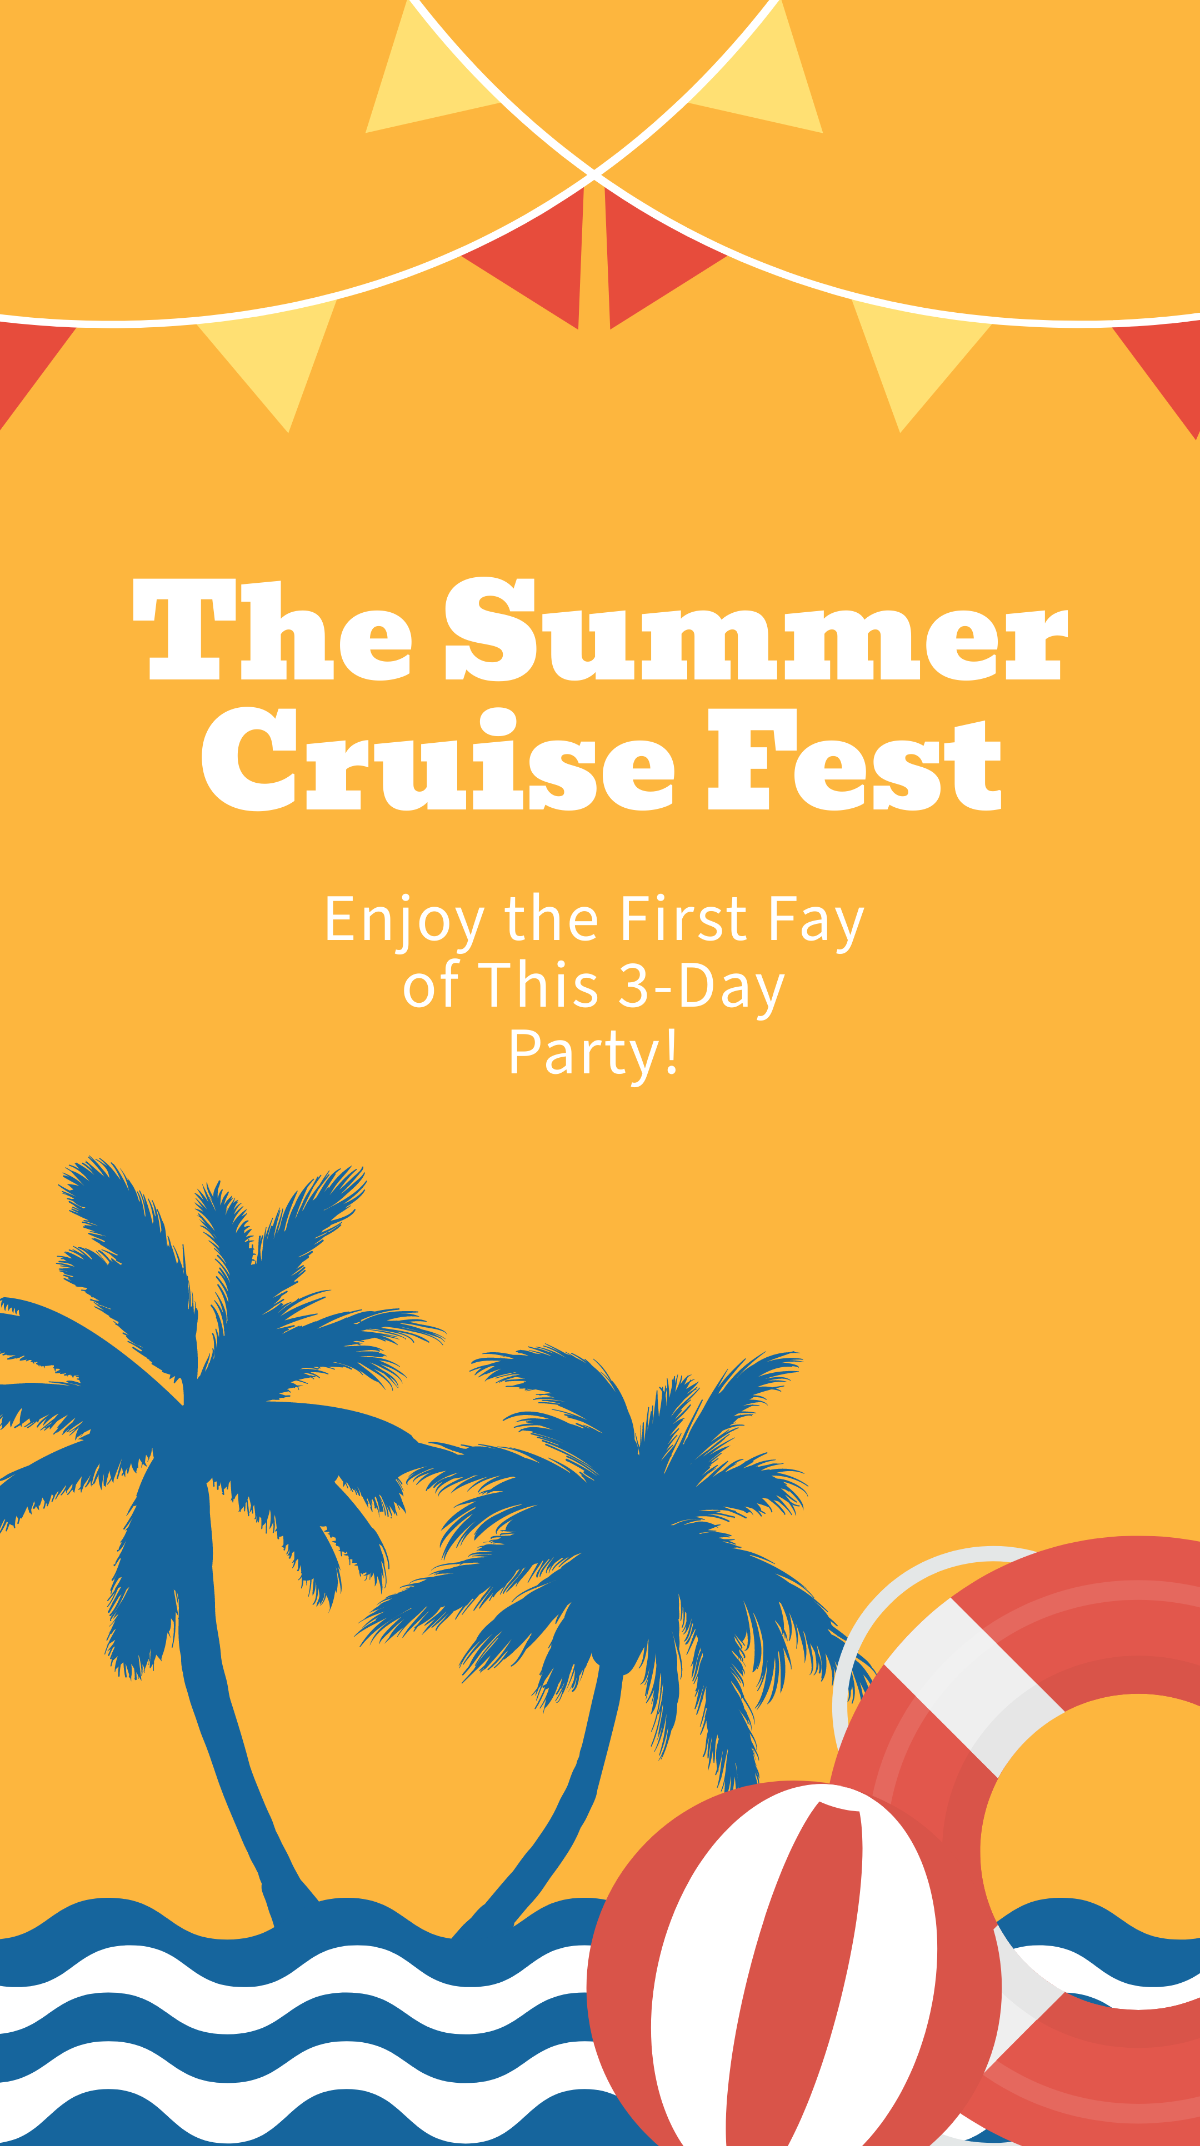 First Day of Summer Party Whatsapp Post Template